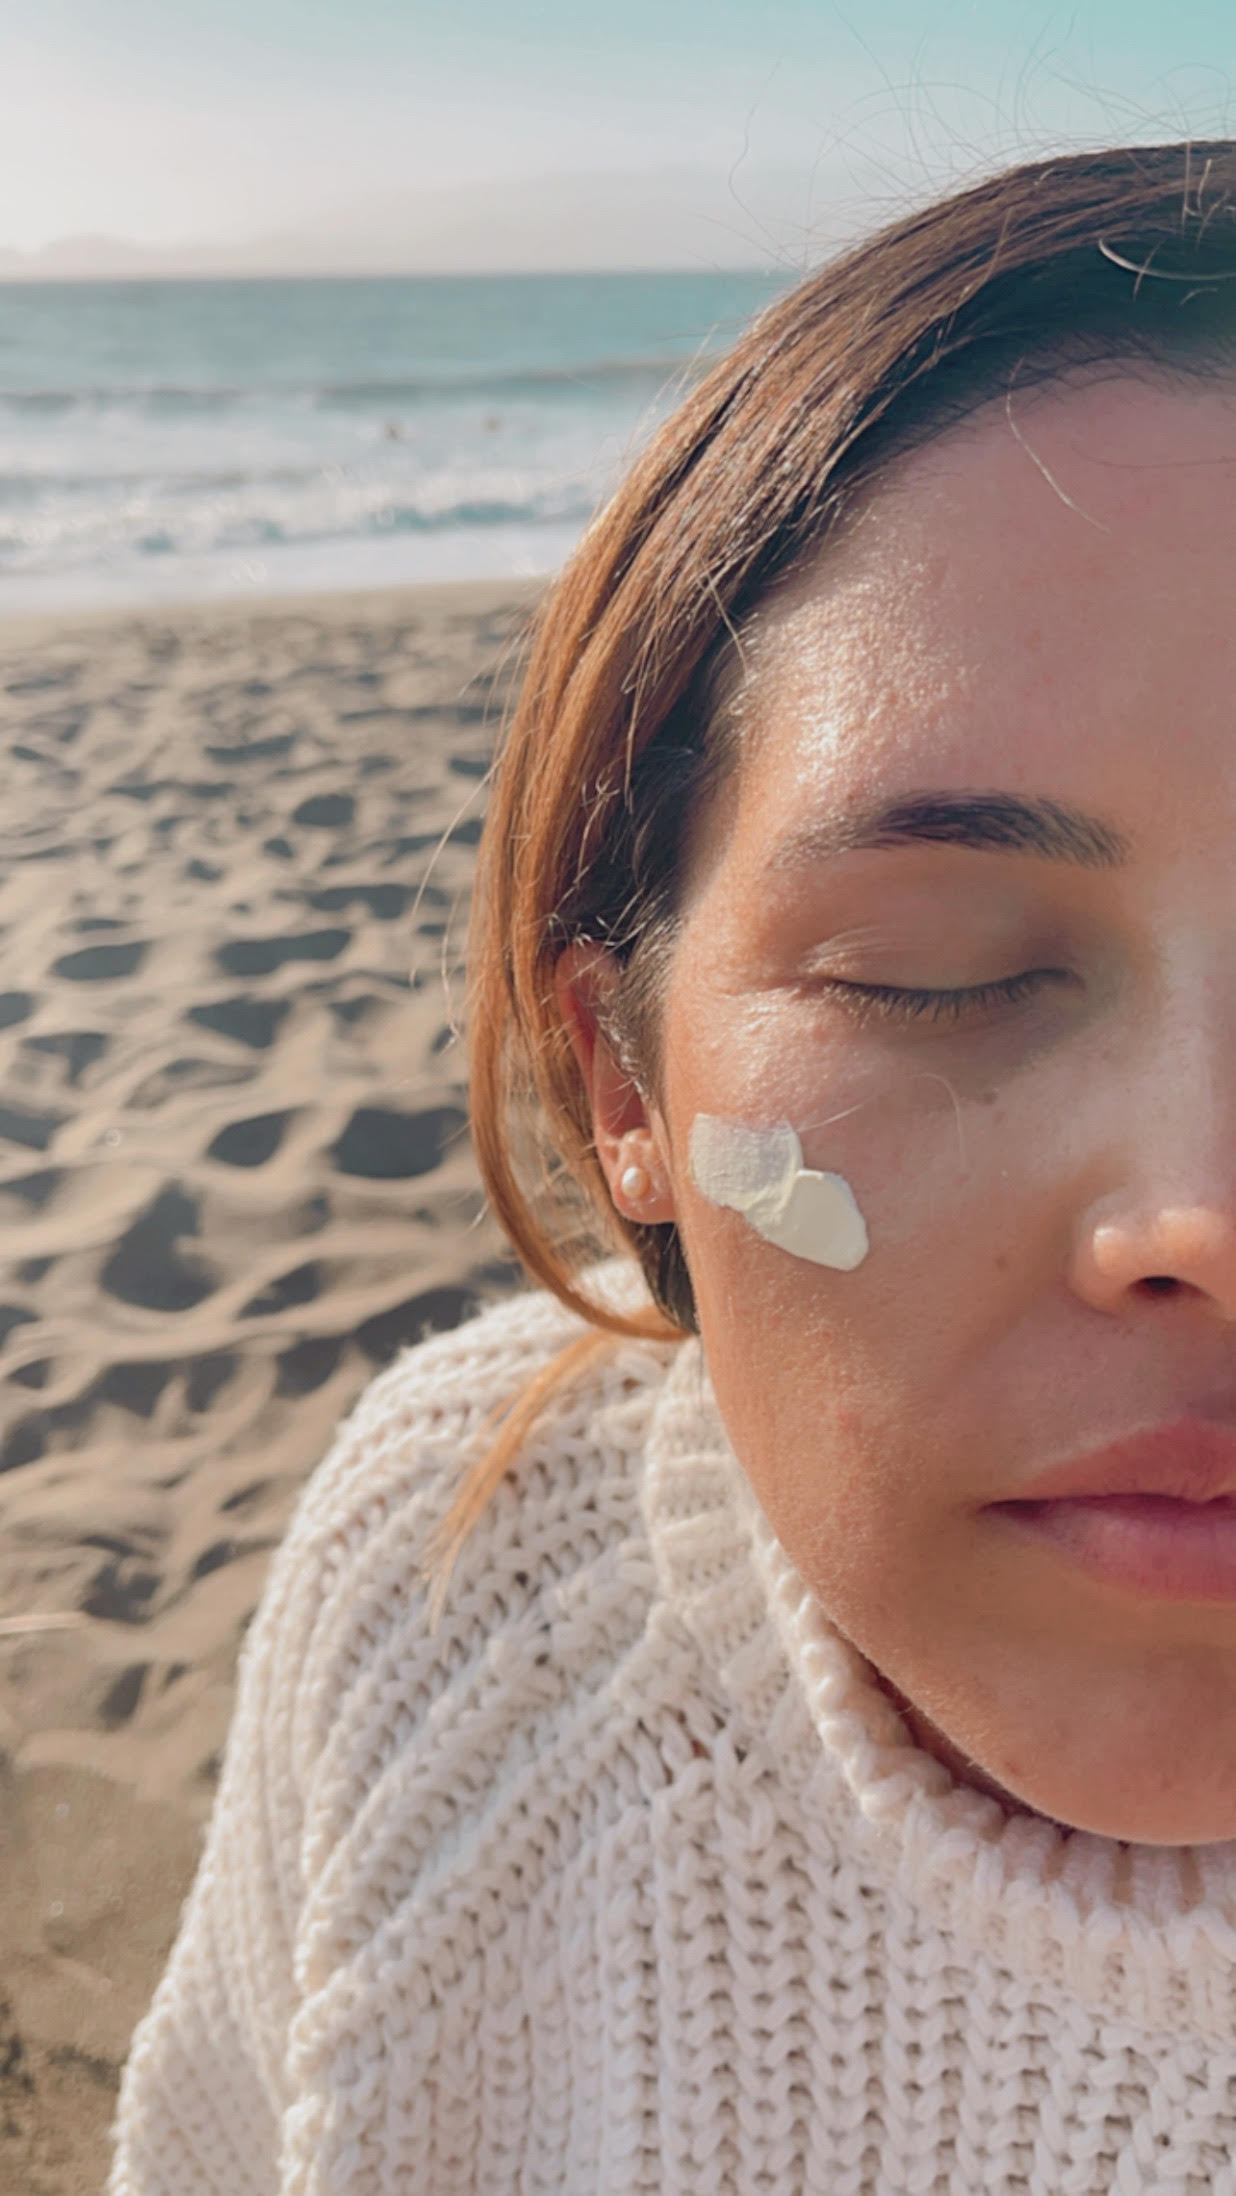 5 Ingredients to Avoid in your Sunscreen